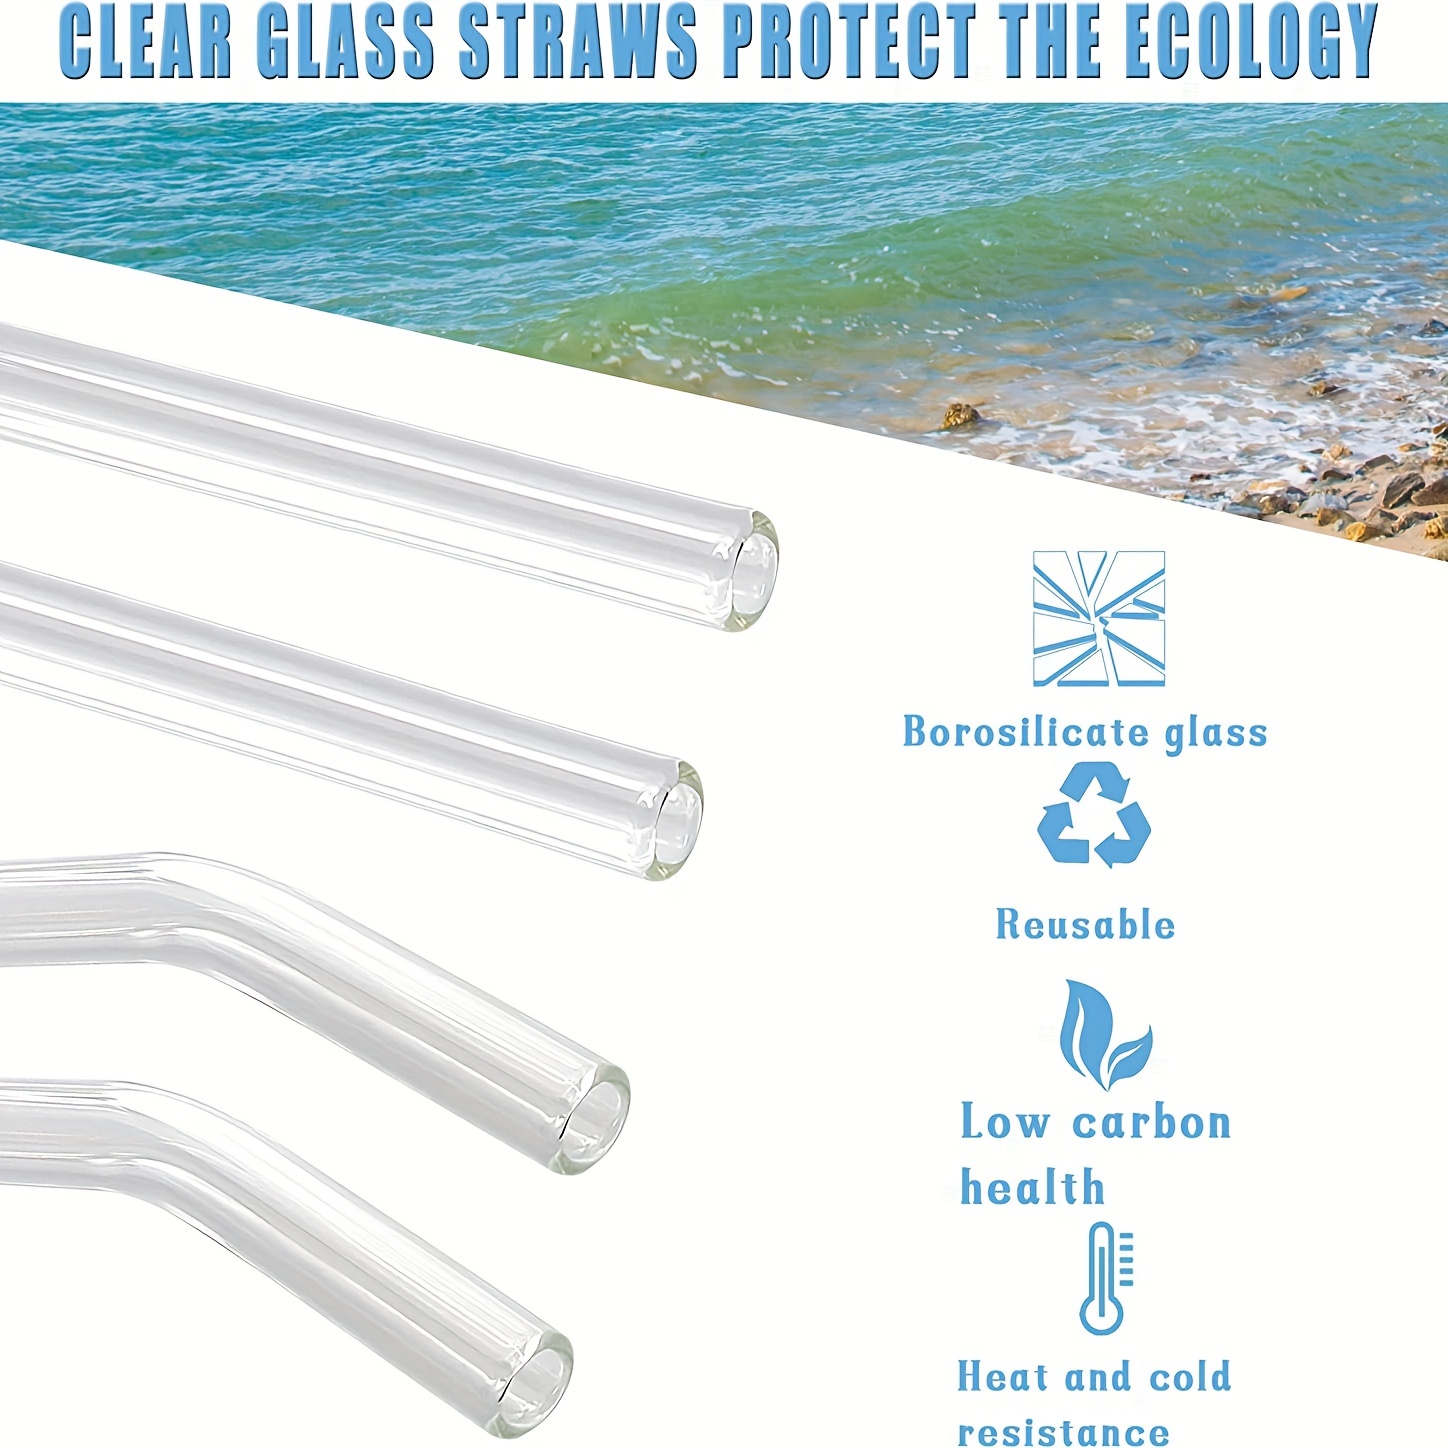 12 Pcs Glass Drinking Straws Reusable Straight Curved Glass Straws